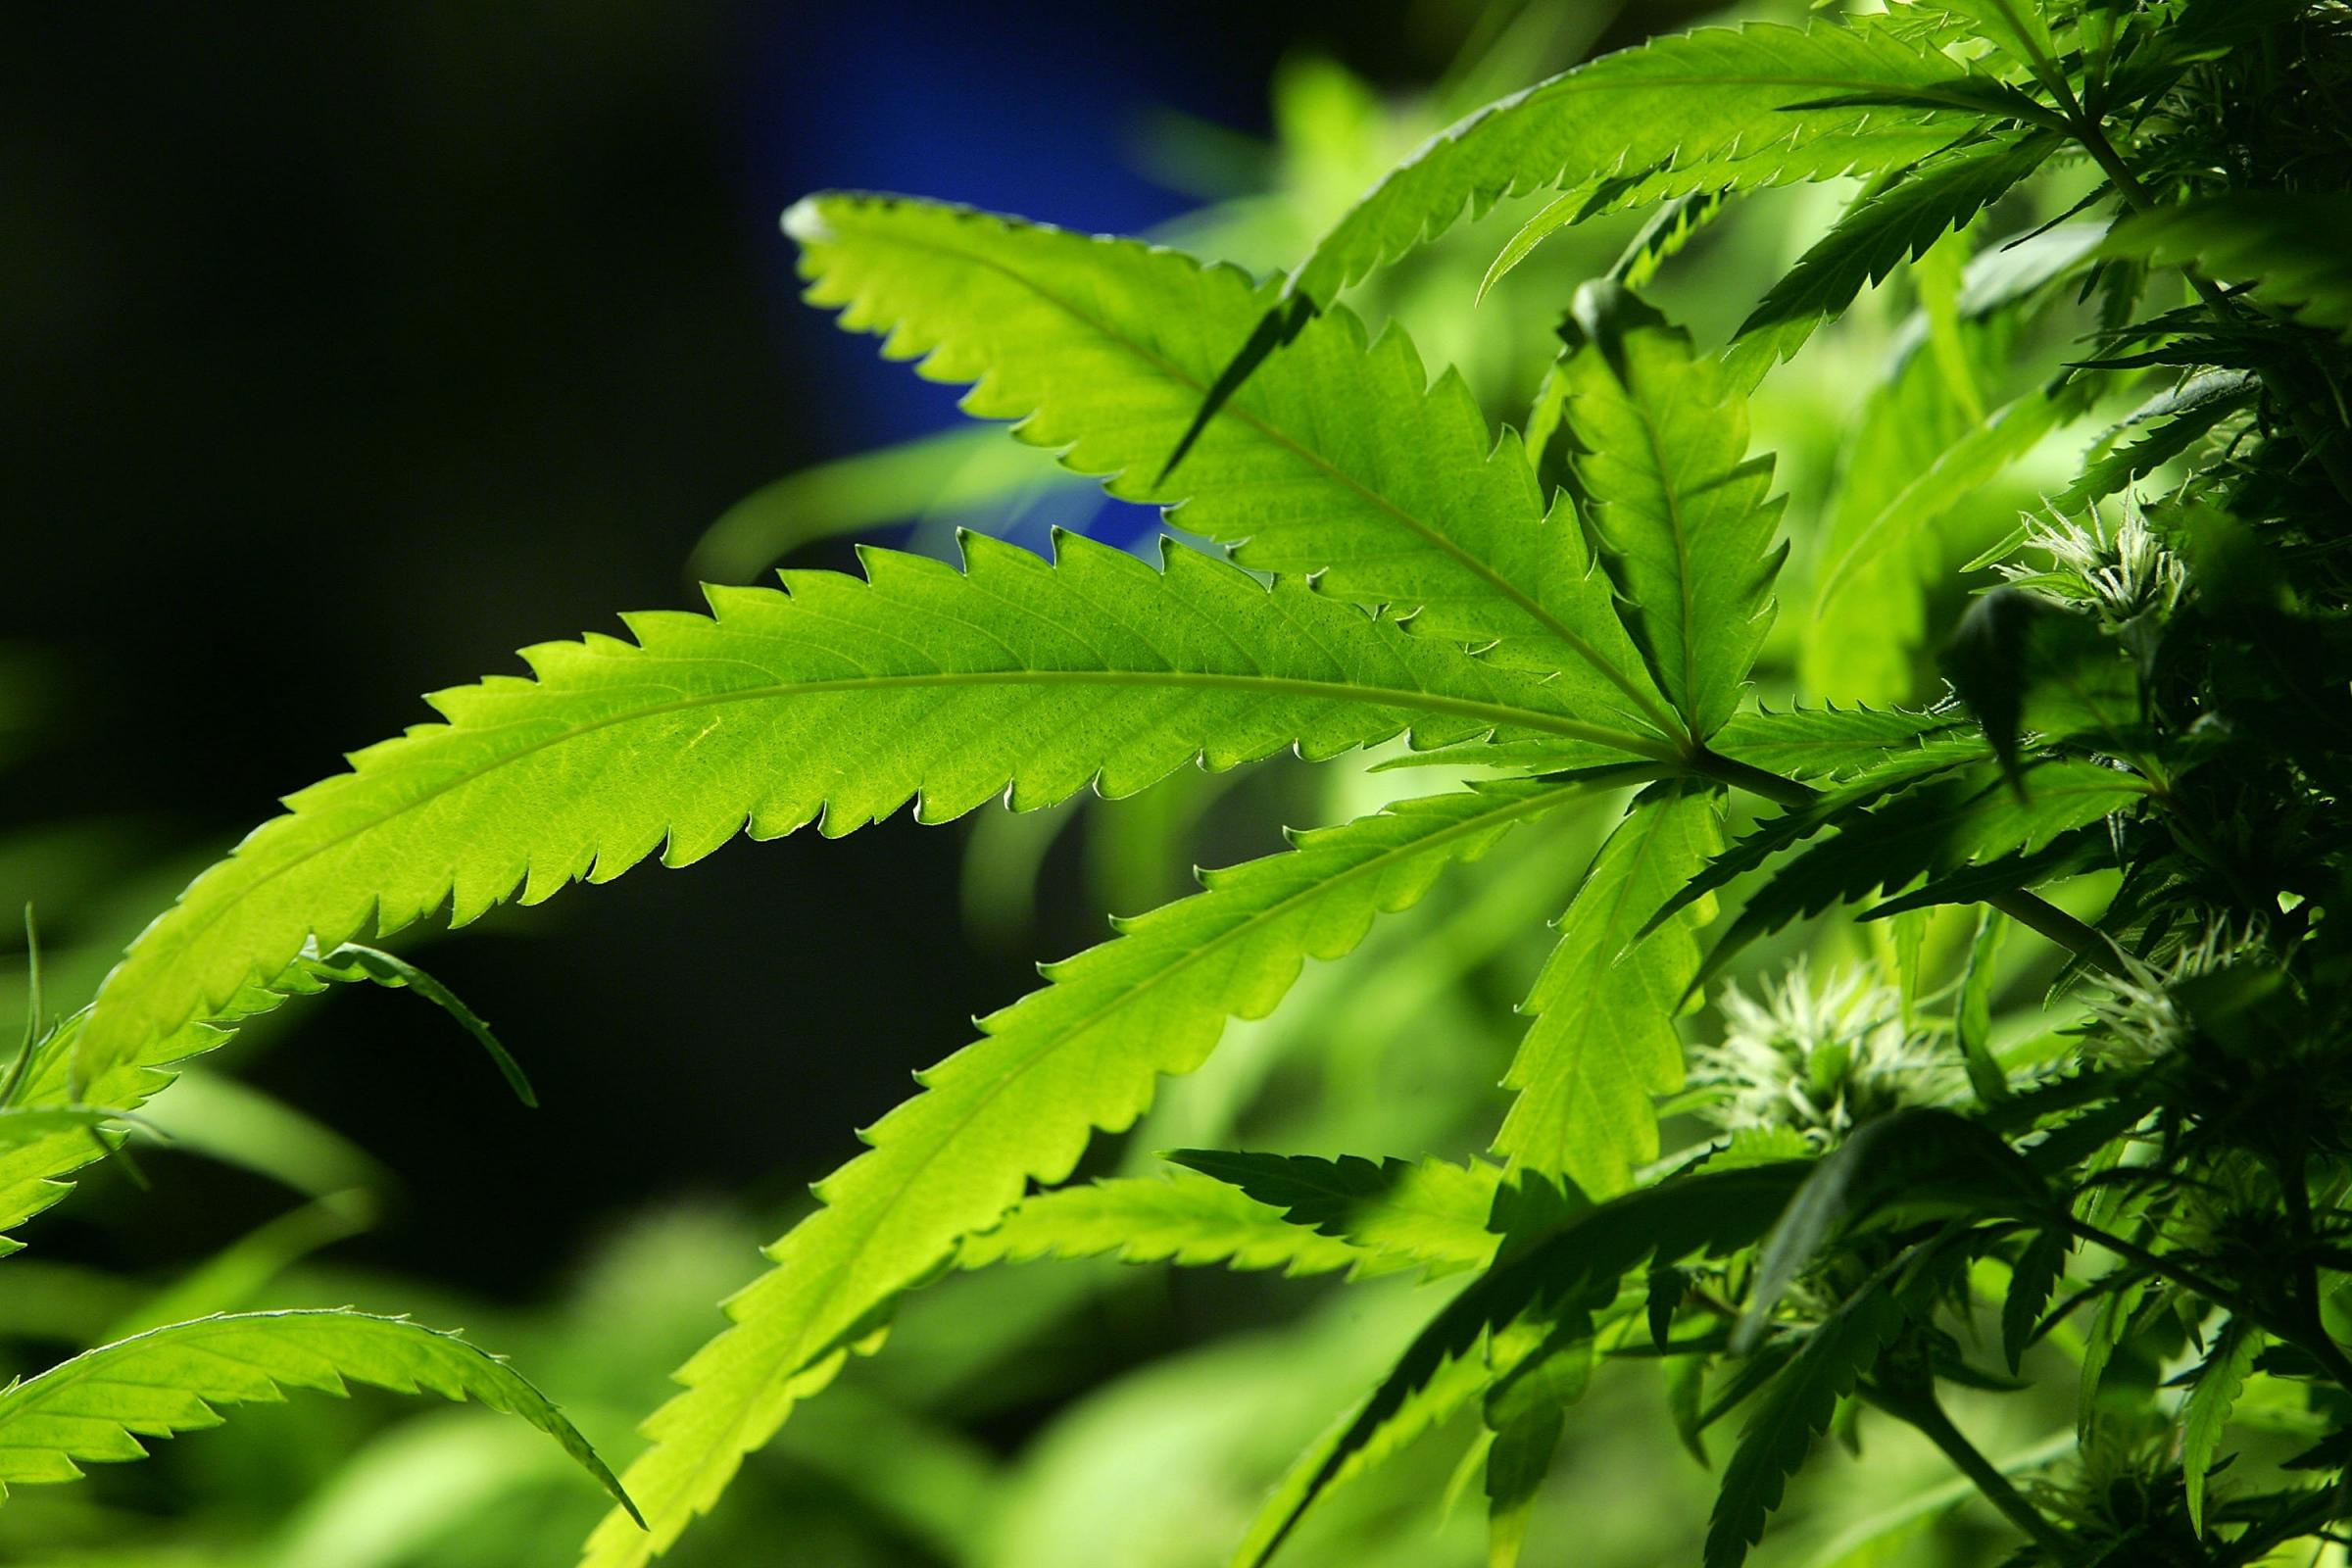 Scotland is set for a multi-million pound boon from the cannabis industry after a worldwide health agency confirmed that the drug provides medicinal relief for a range of ailments.